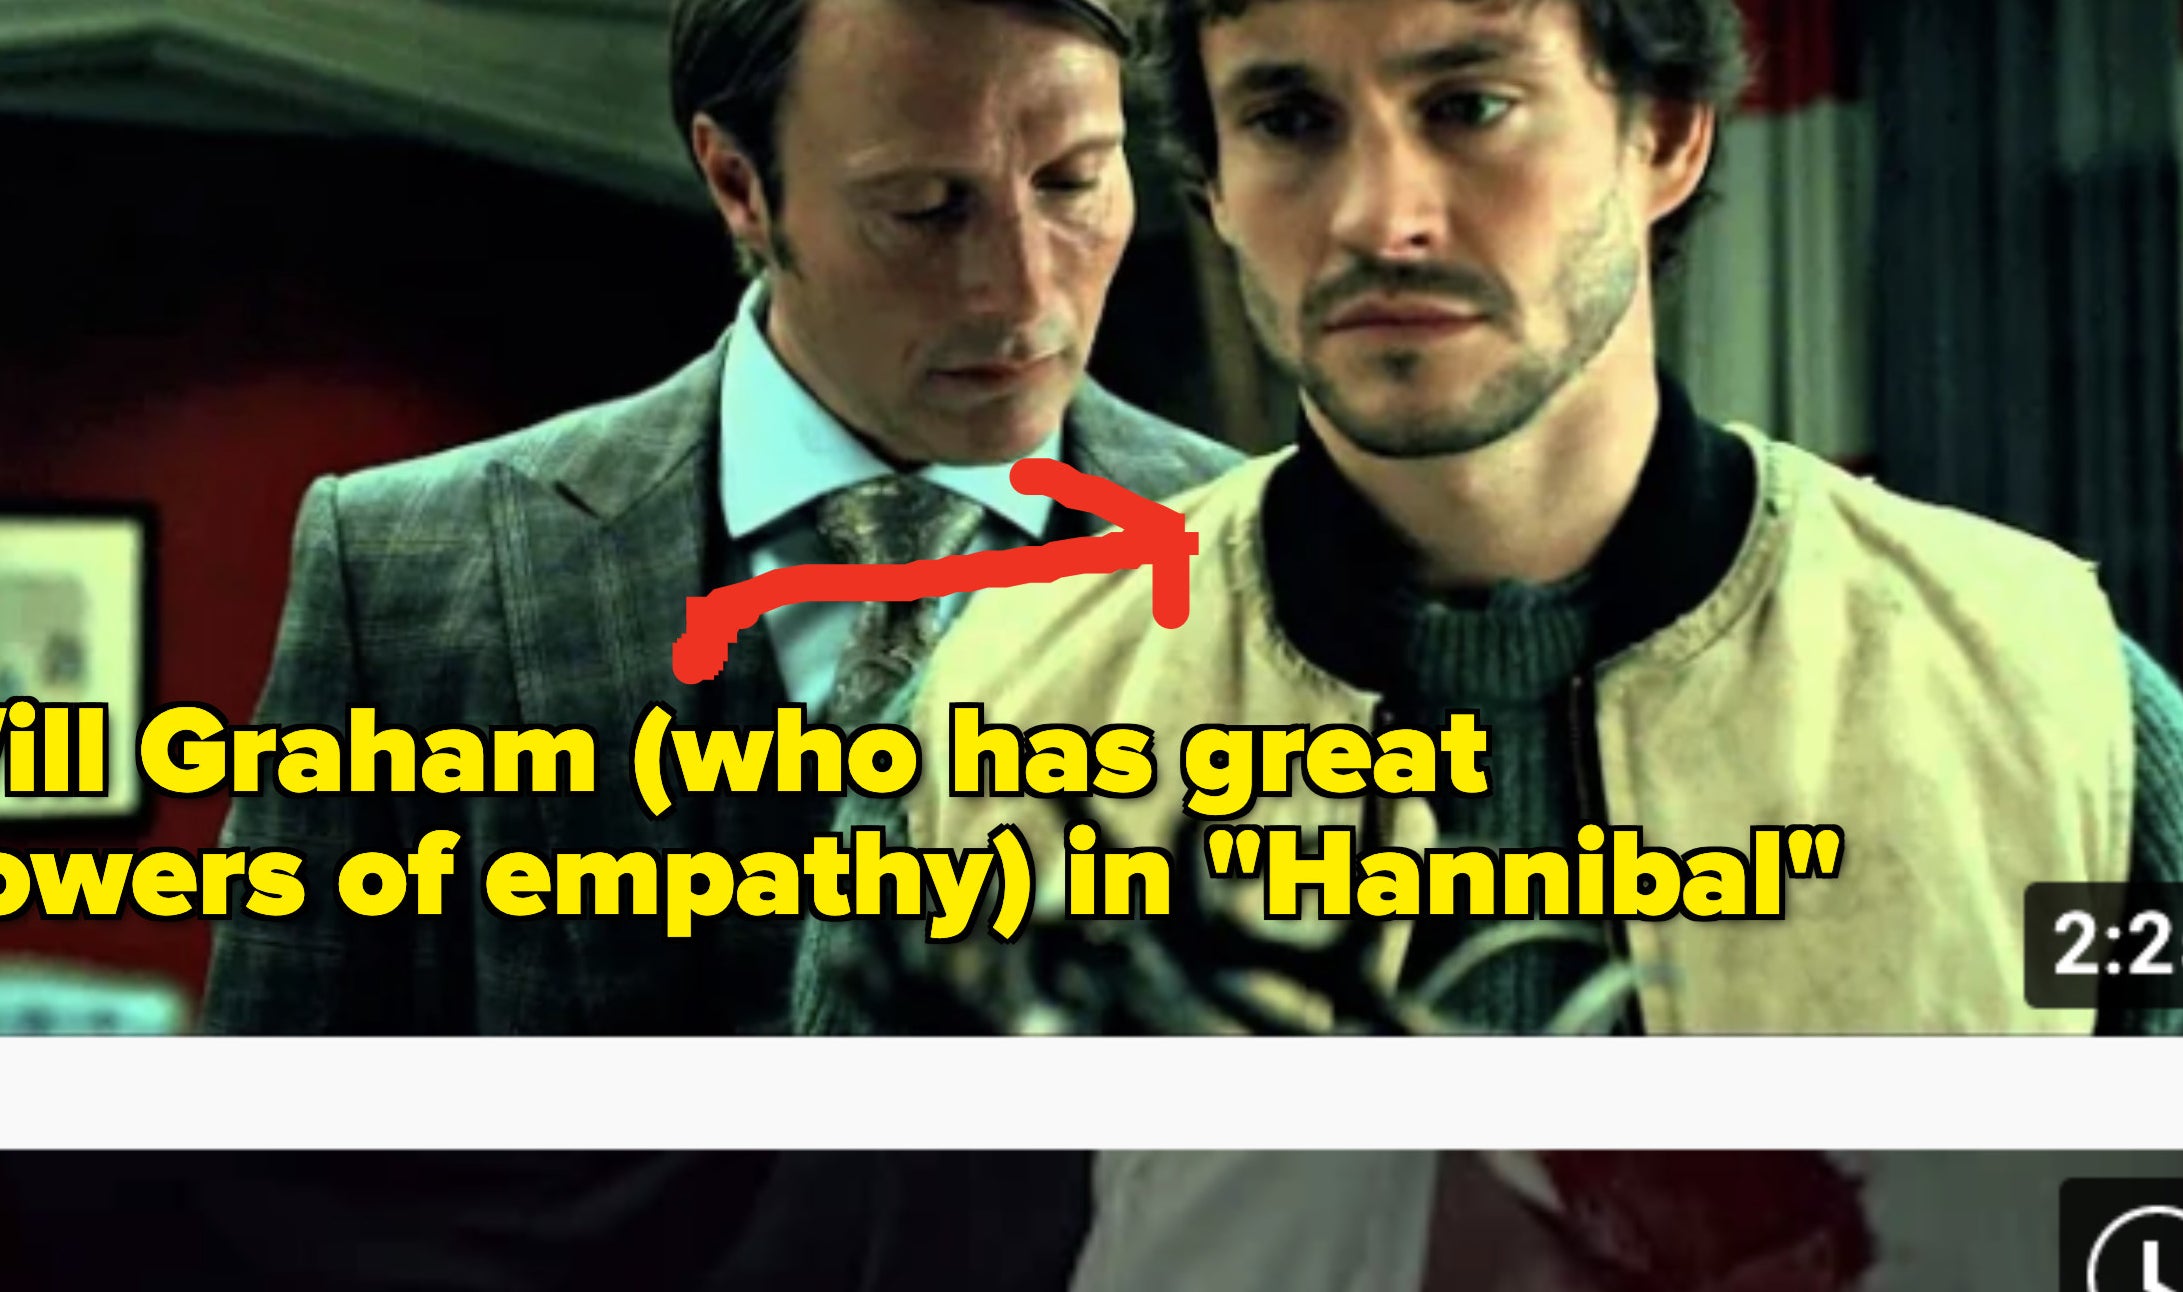 Will Graham who has powers of empathy in &quot;Hannibal&quot;